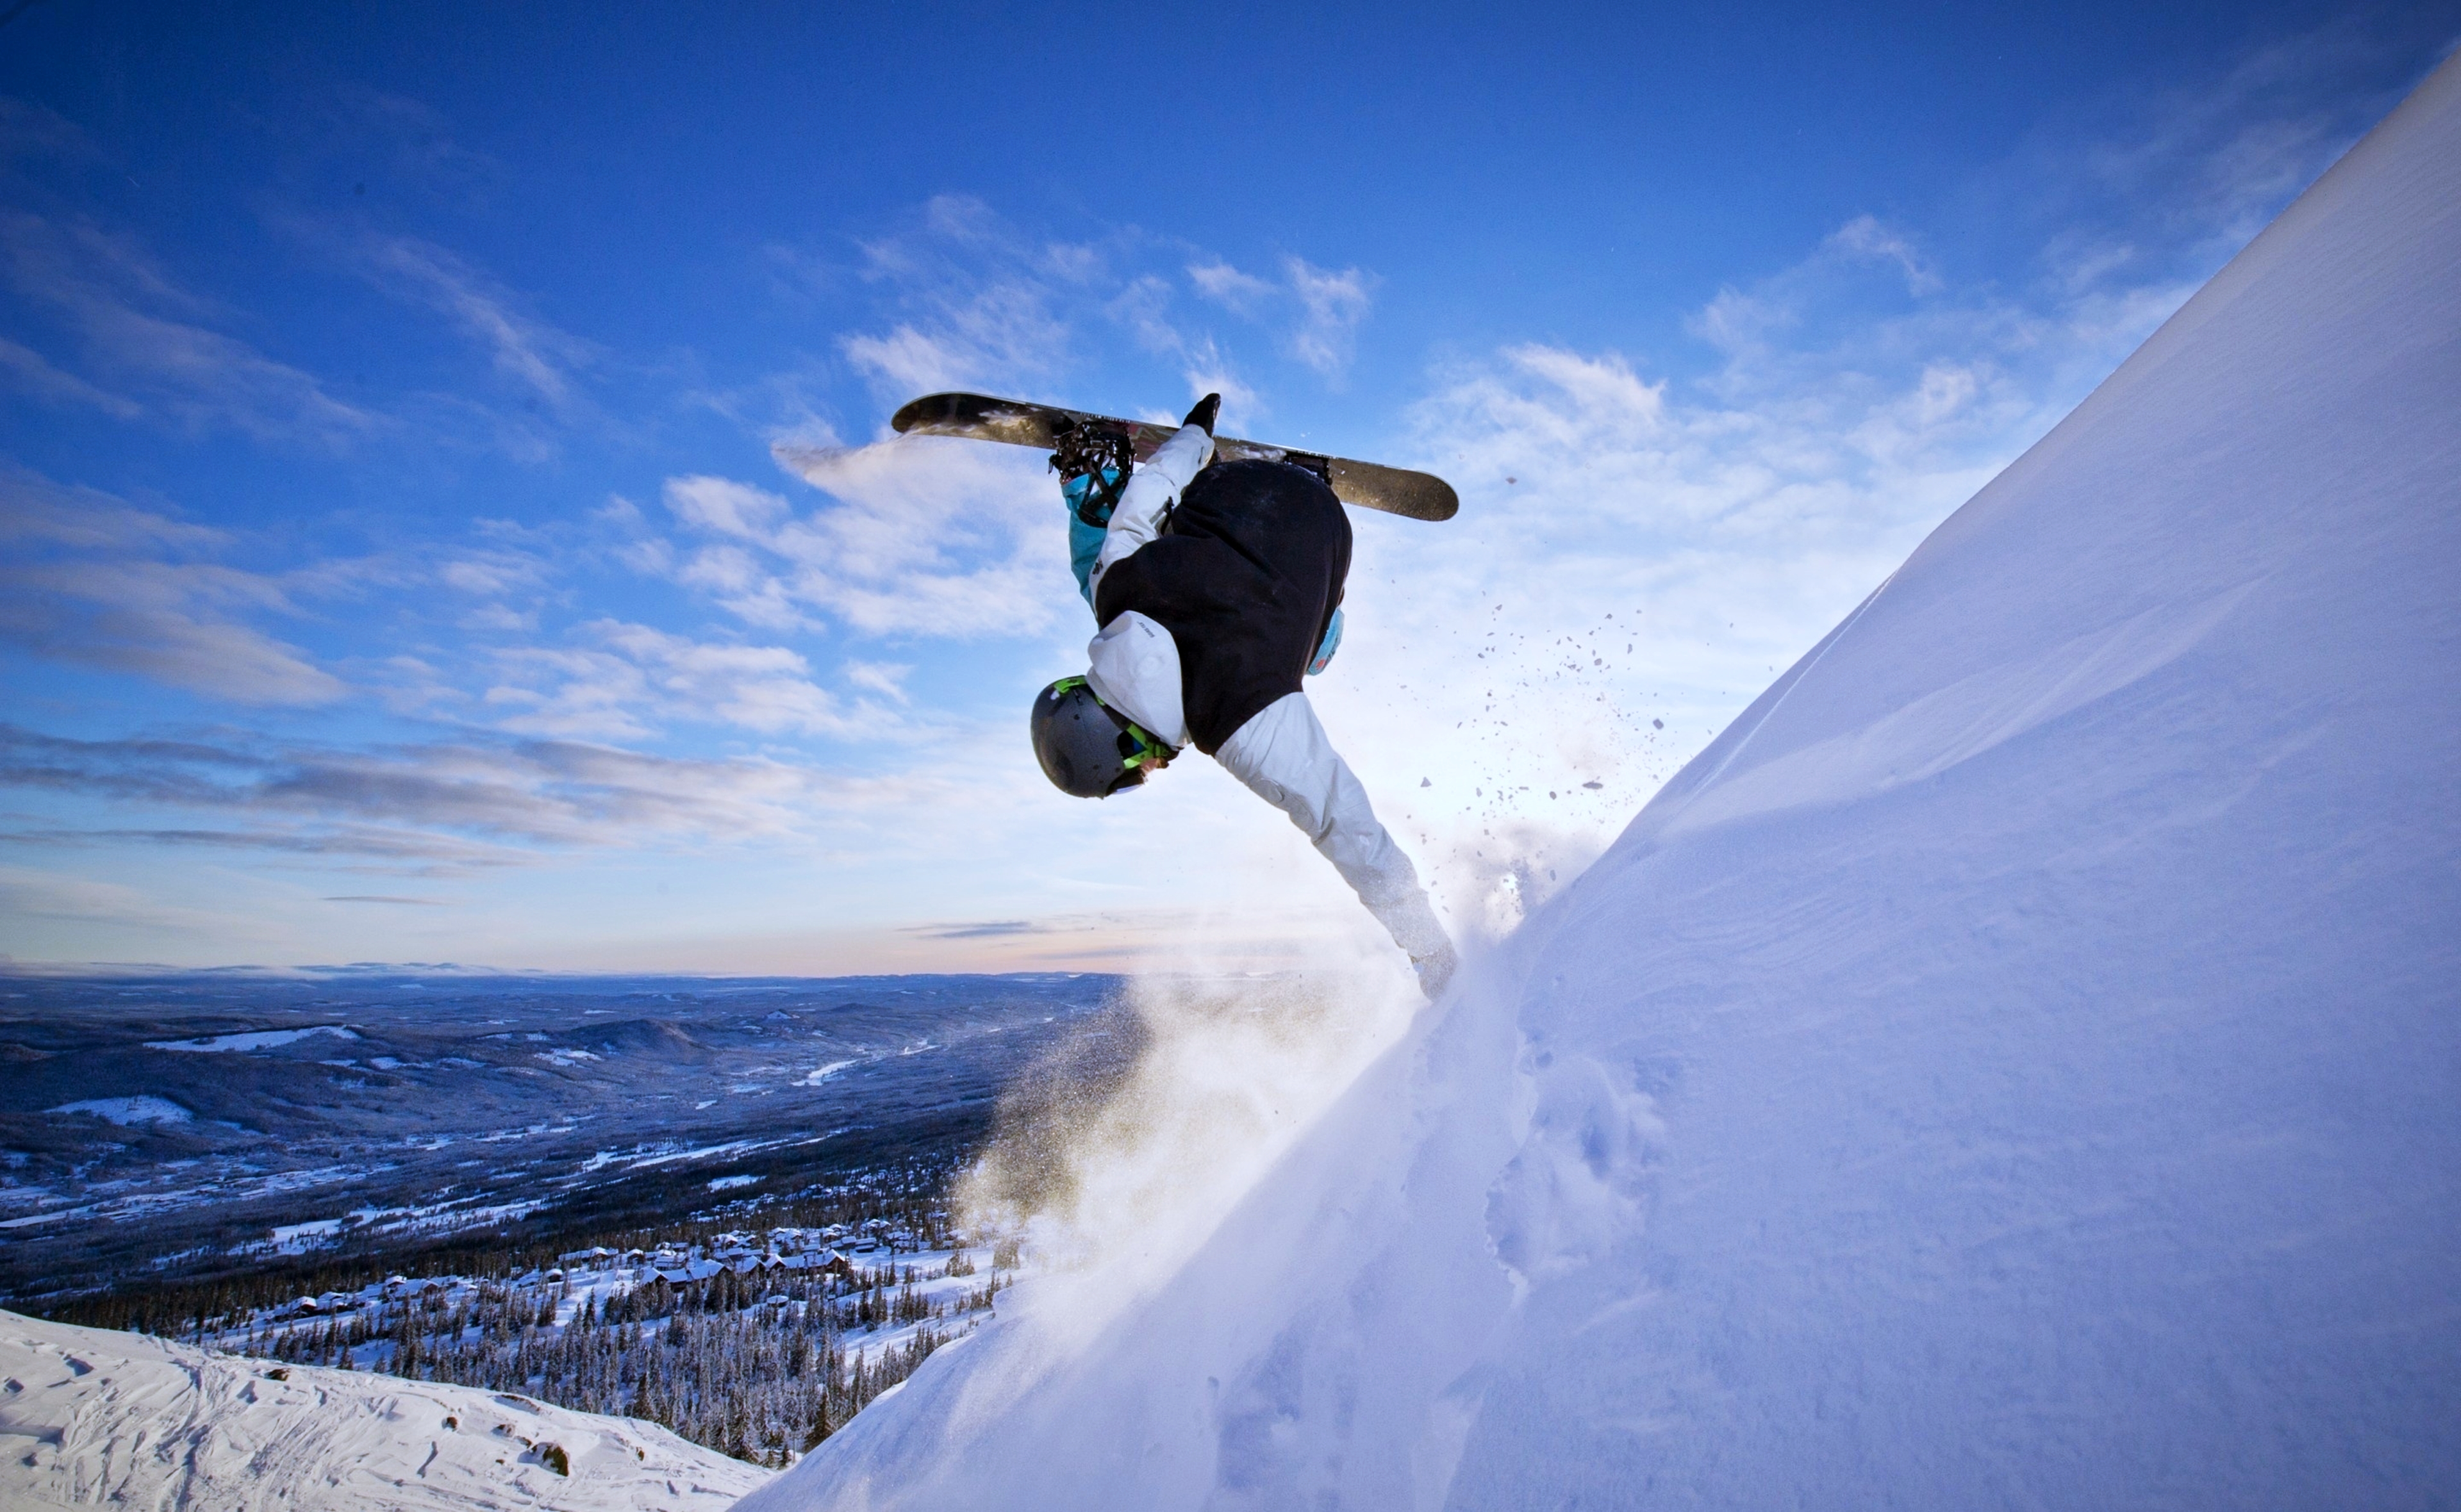 Cool Snowboarding Wallpapers